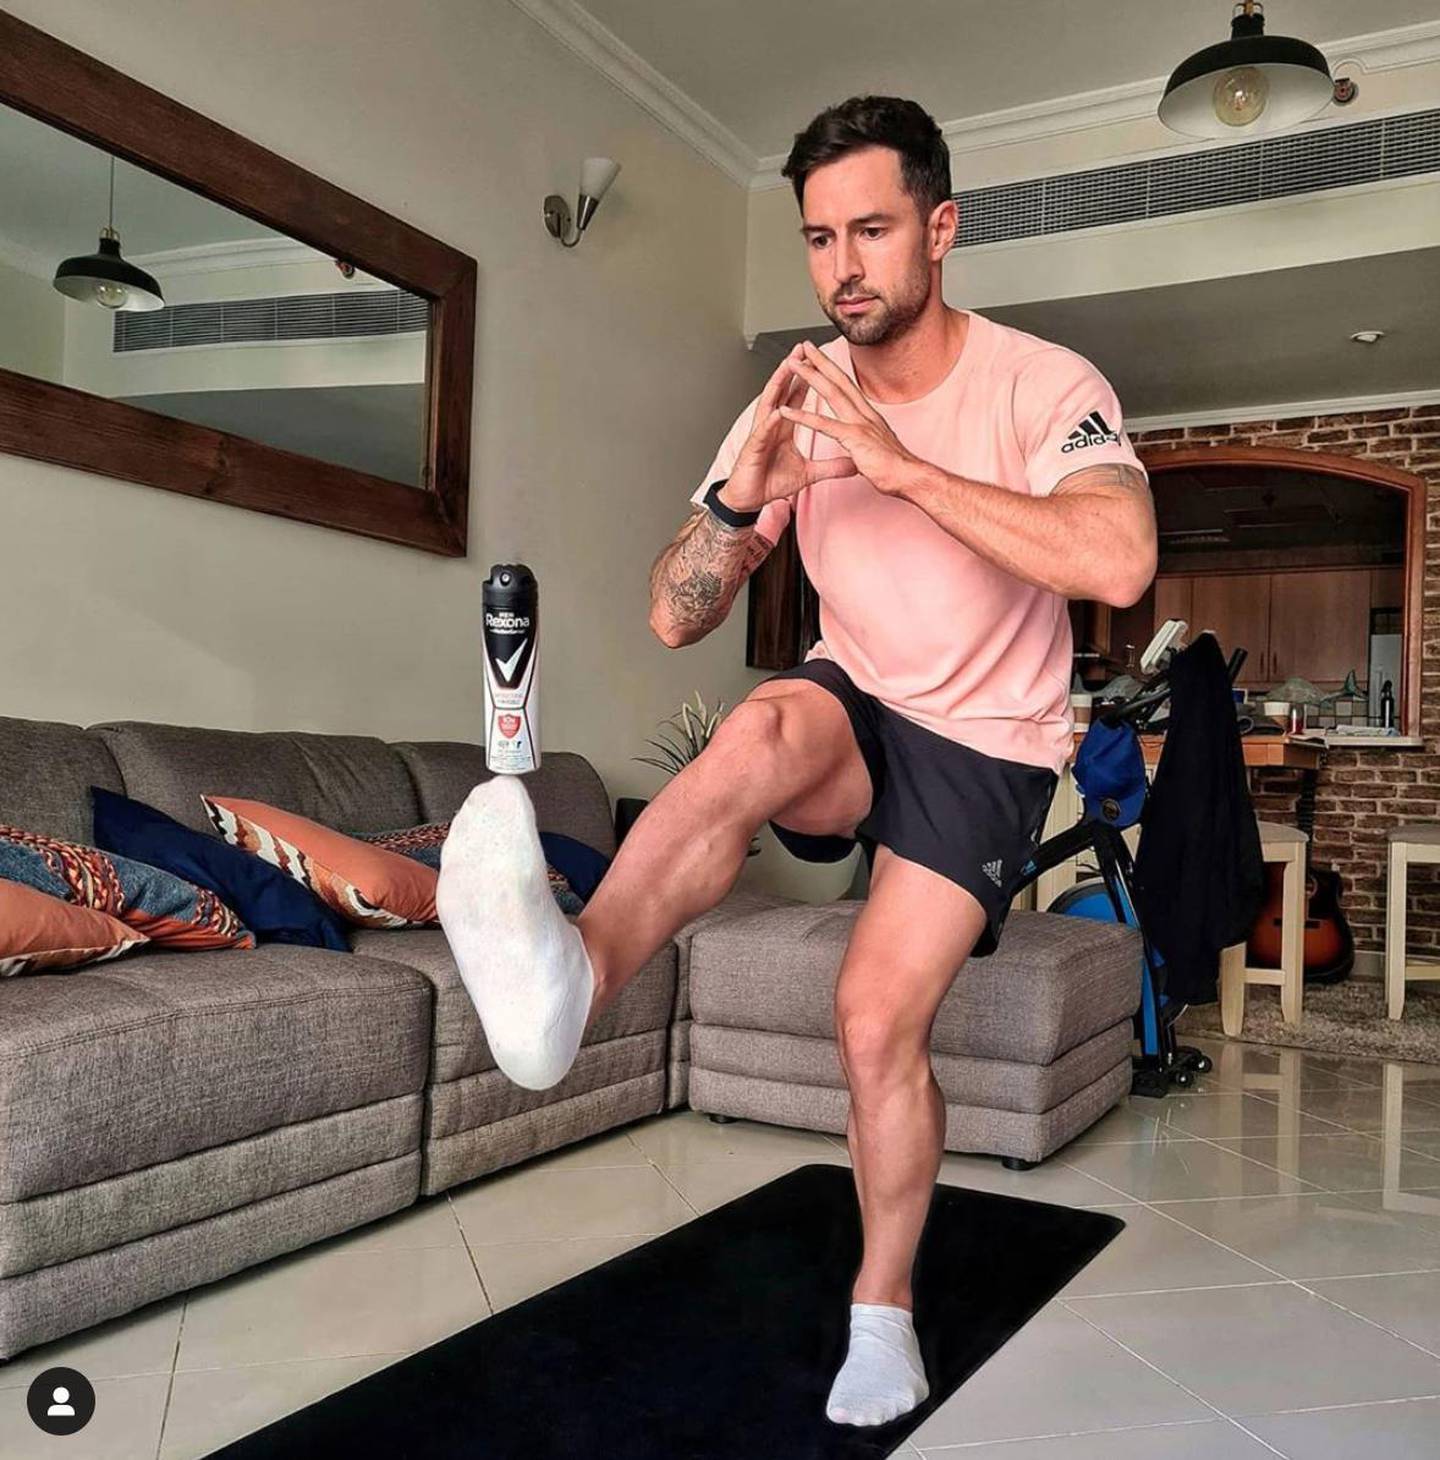 Dubai personal trainer Peter Barron says basements should be used for workouts only sparingly. Courtesy Peter Barron